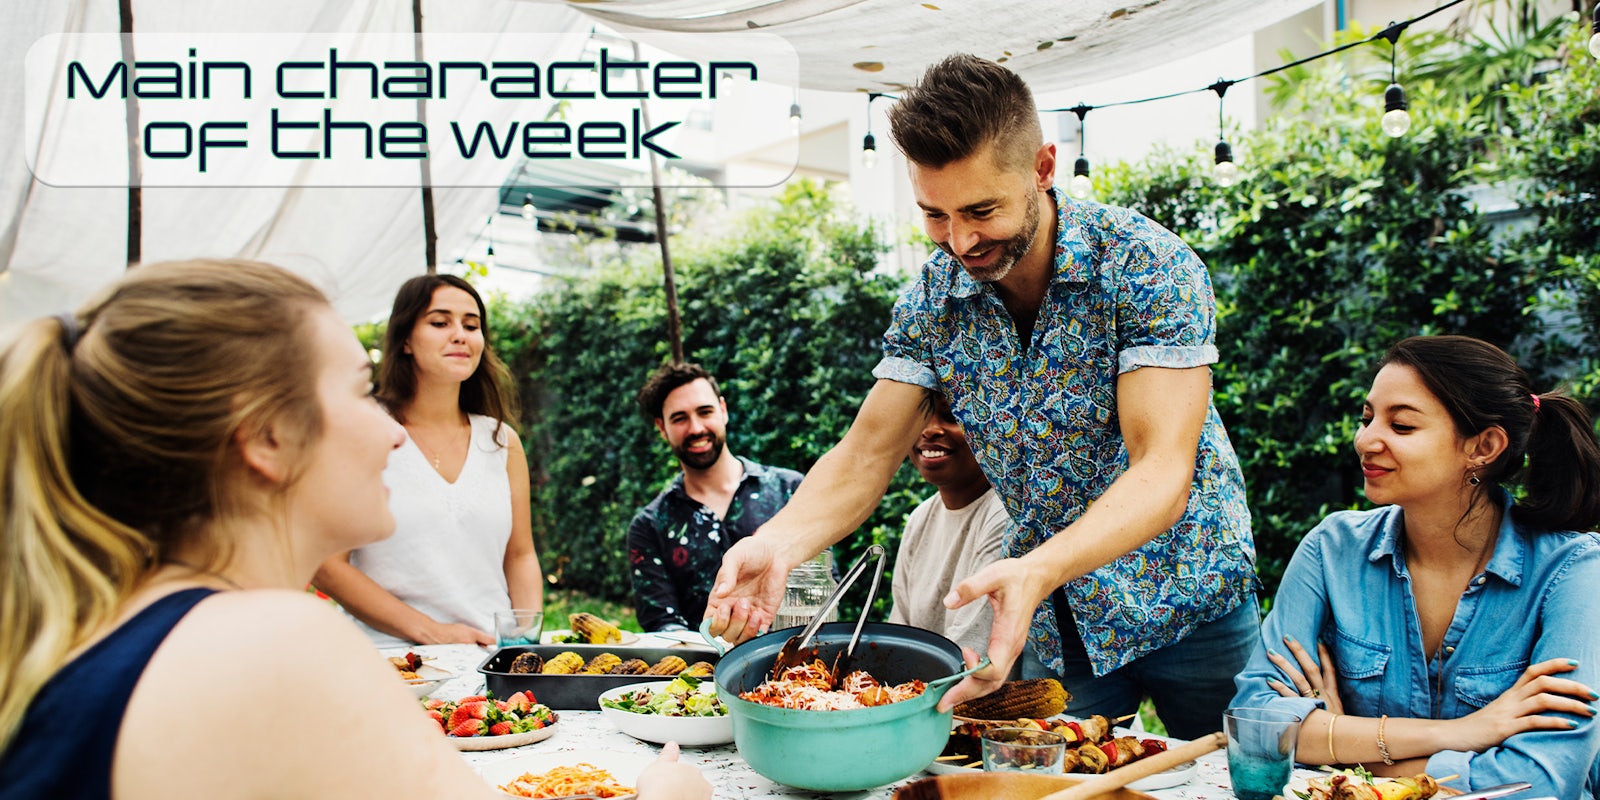 Group of diverse workers sharing potluck. There is text that says 'Main Character of the Week' in a web_crawlr font.